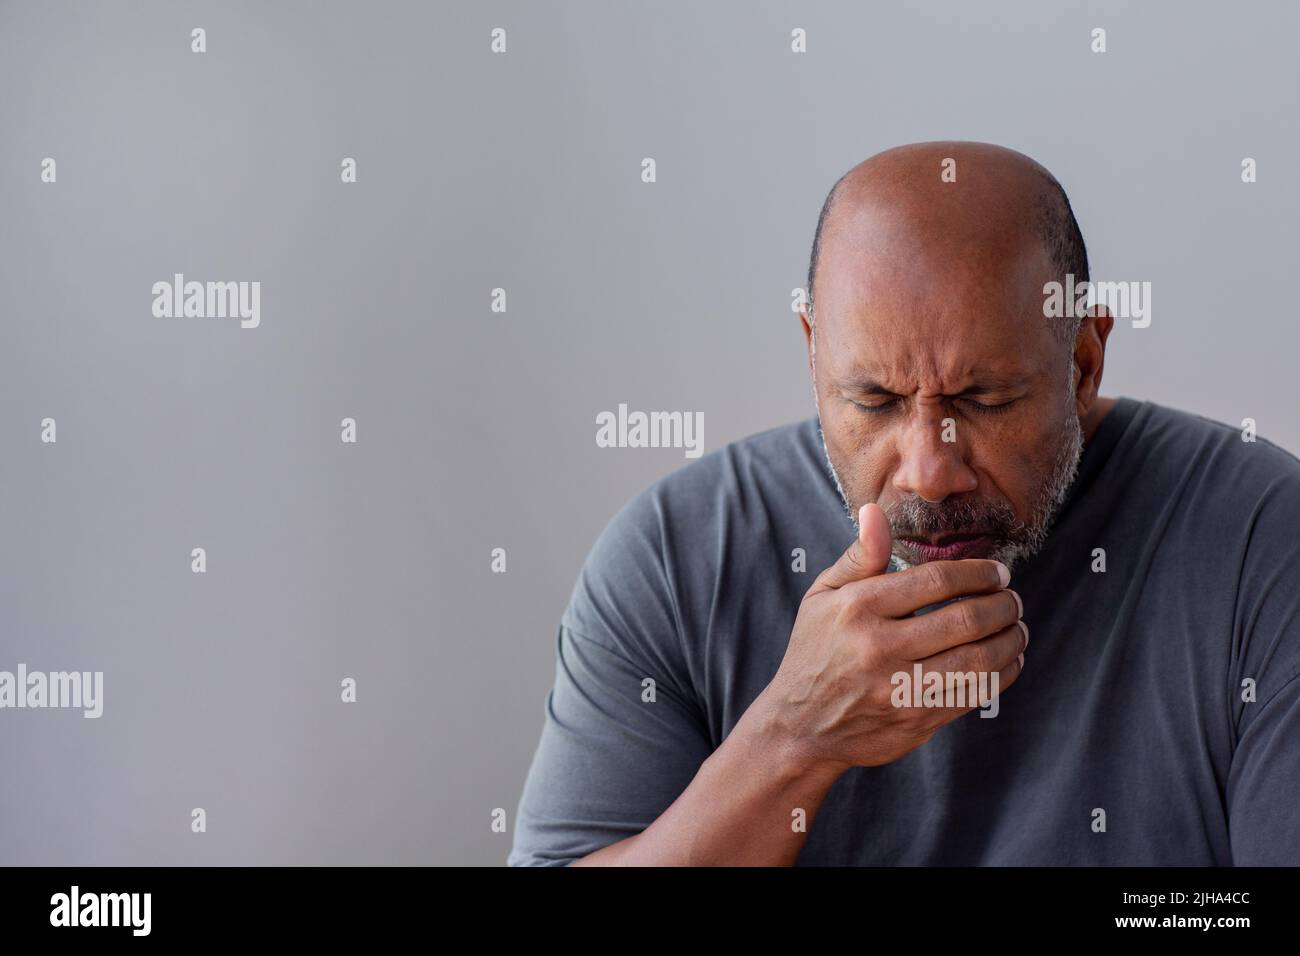 Mature African American man not feeling well who is coughing and has a sore throat. Stock Photo